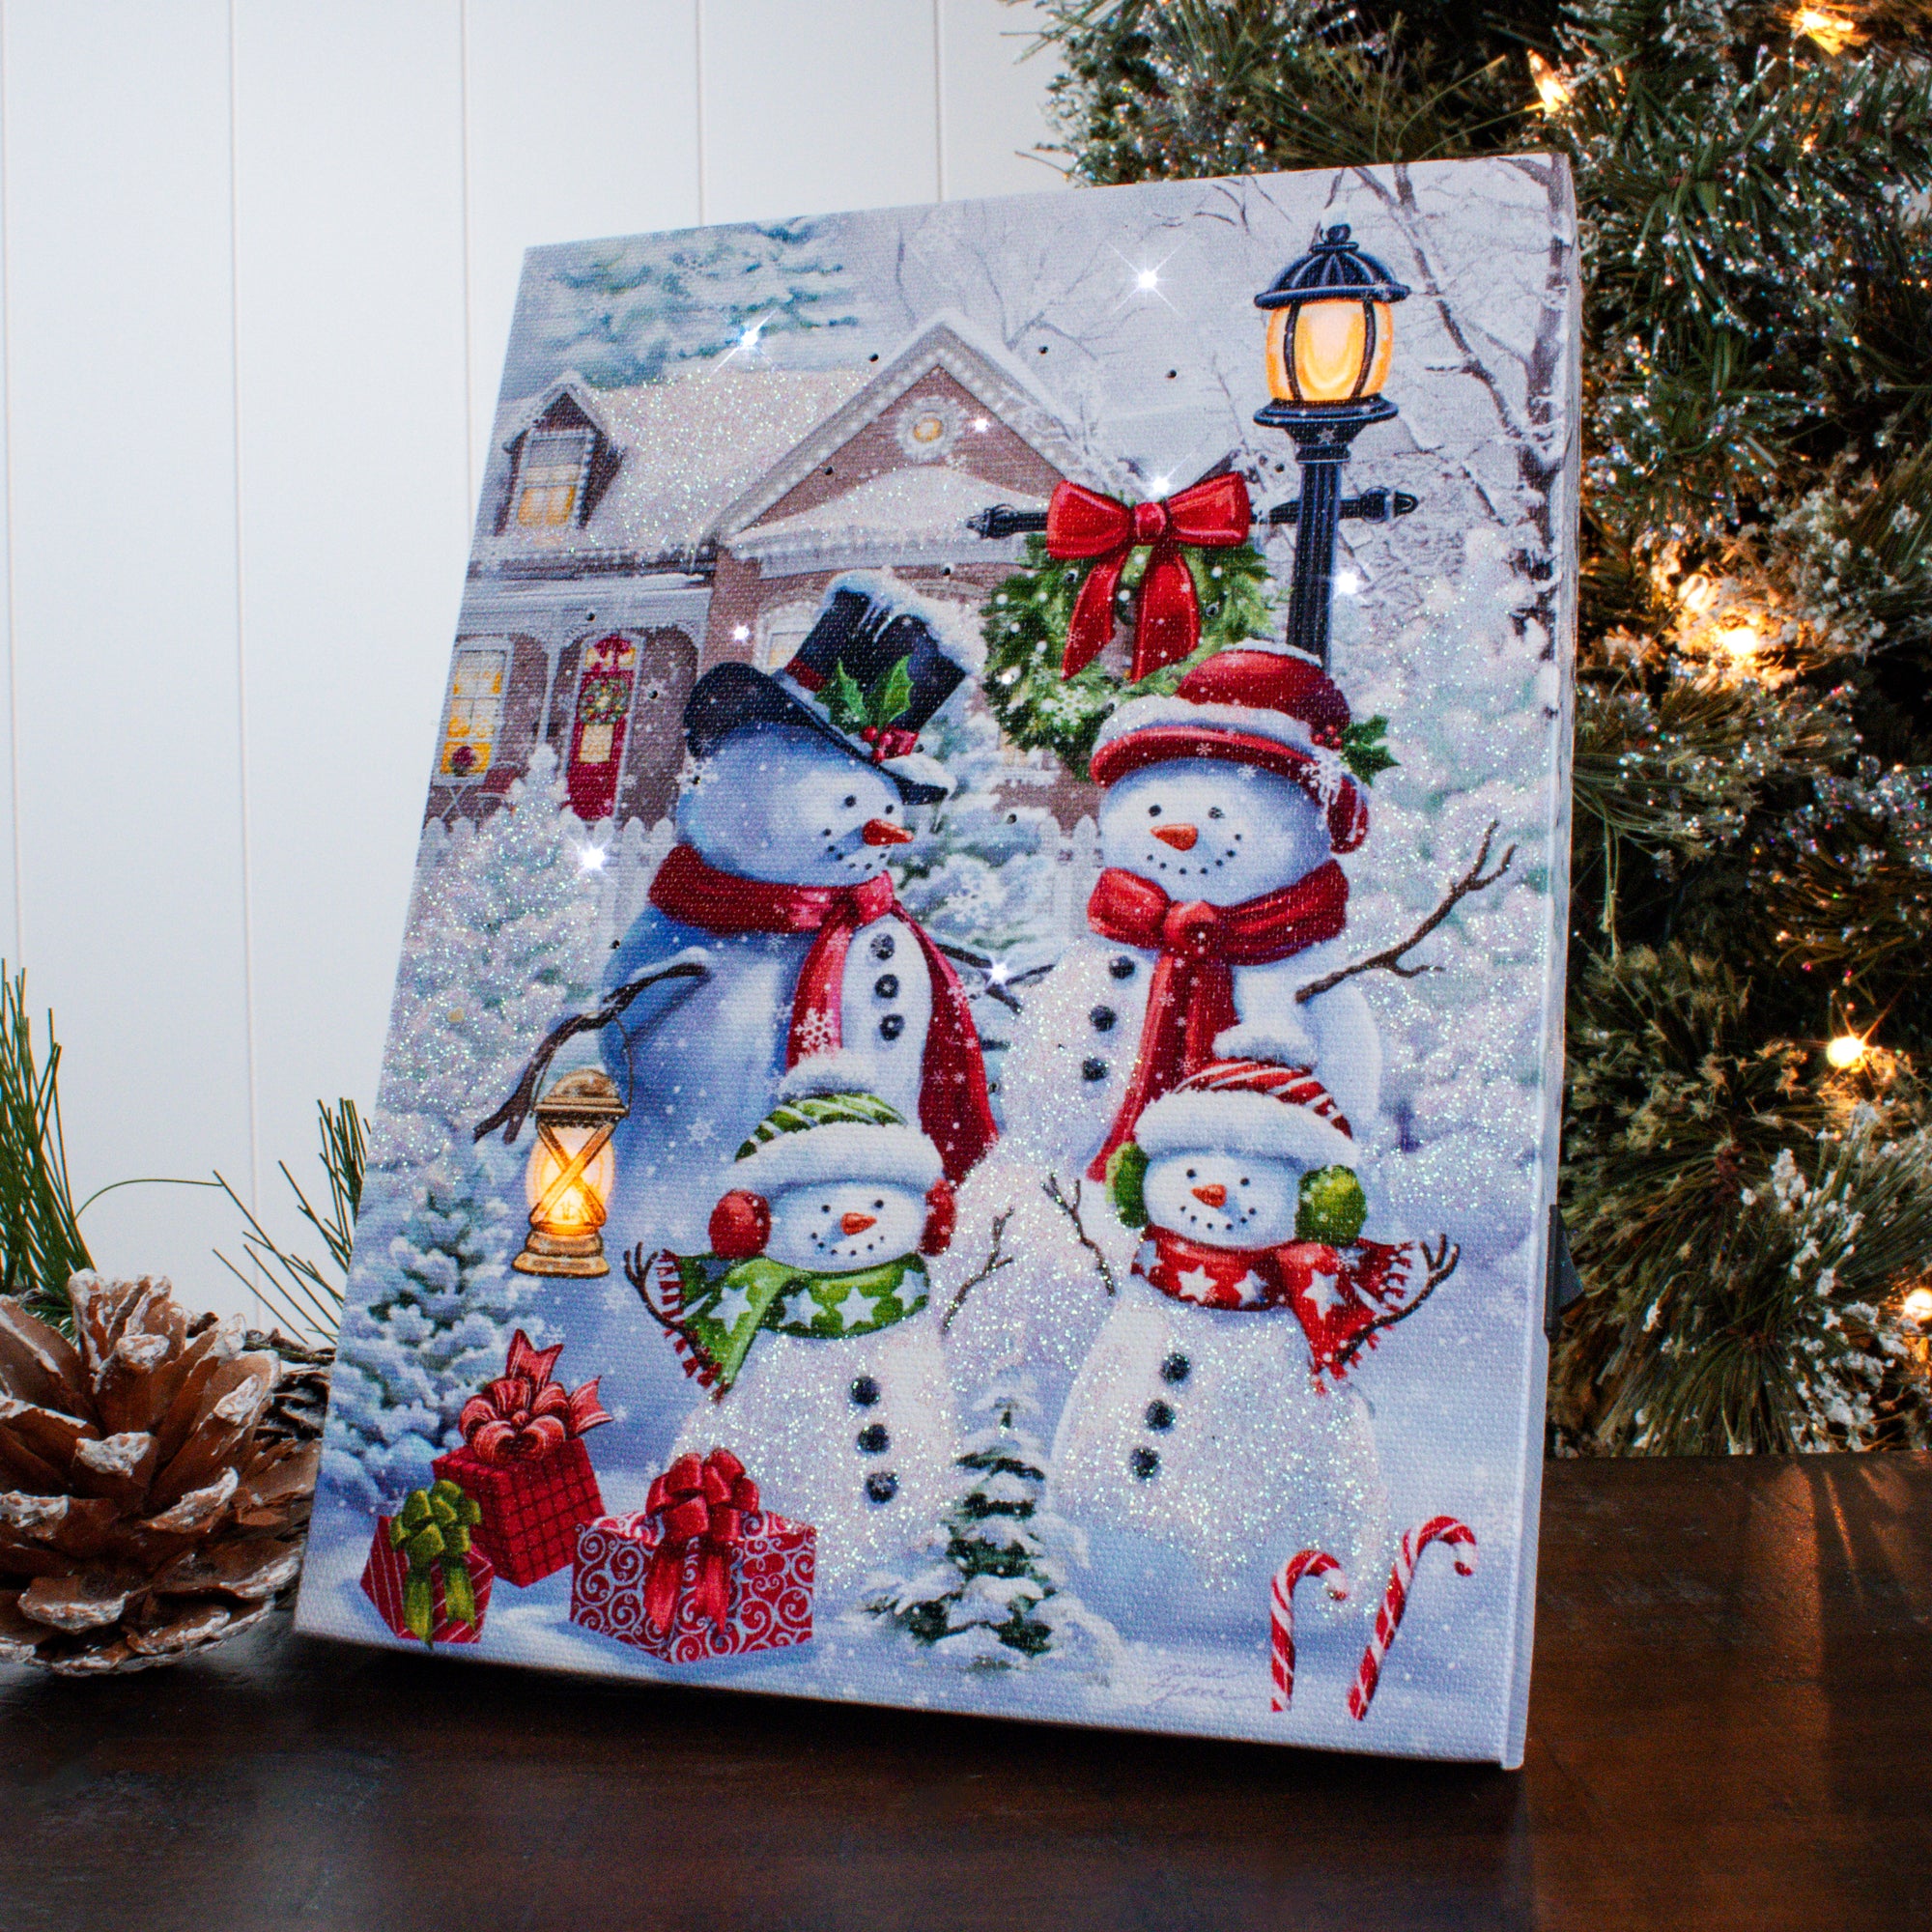 Frosty Family Fun 8x6 Lighted Tabletop Canvas